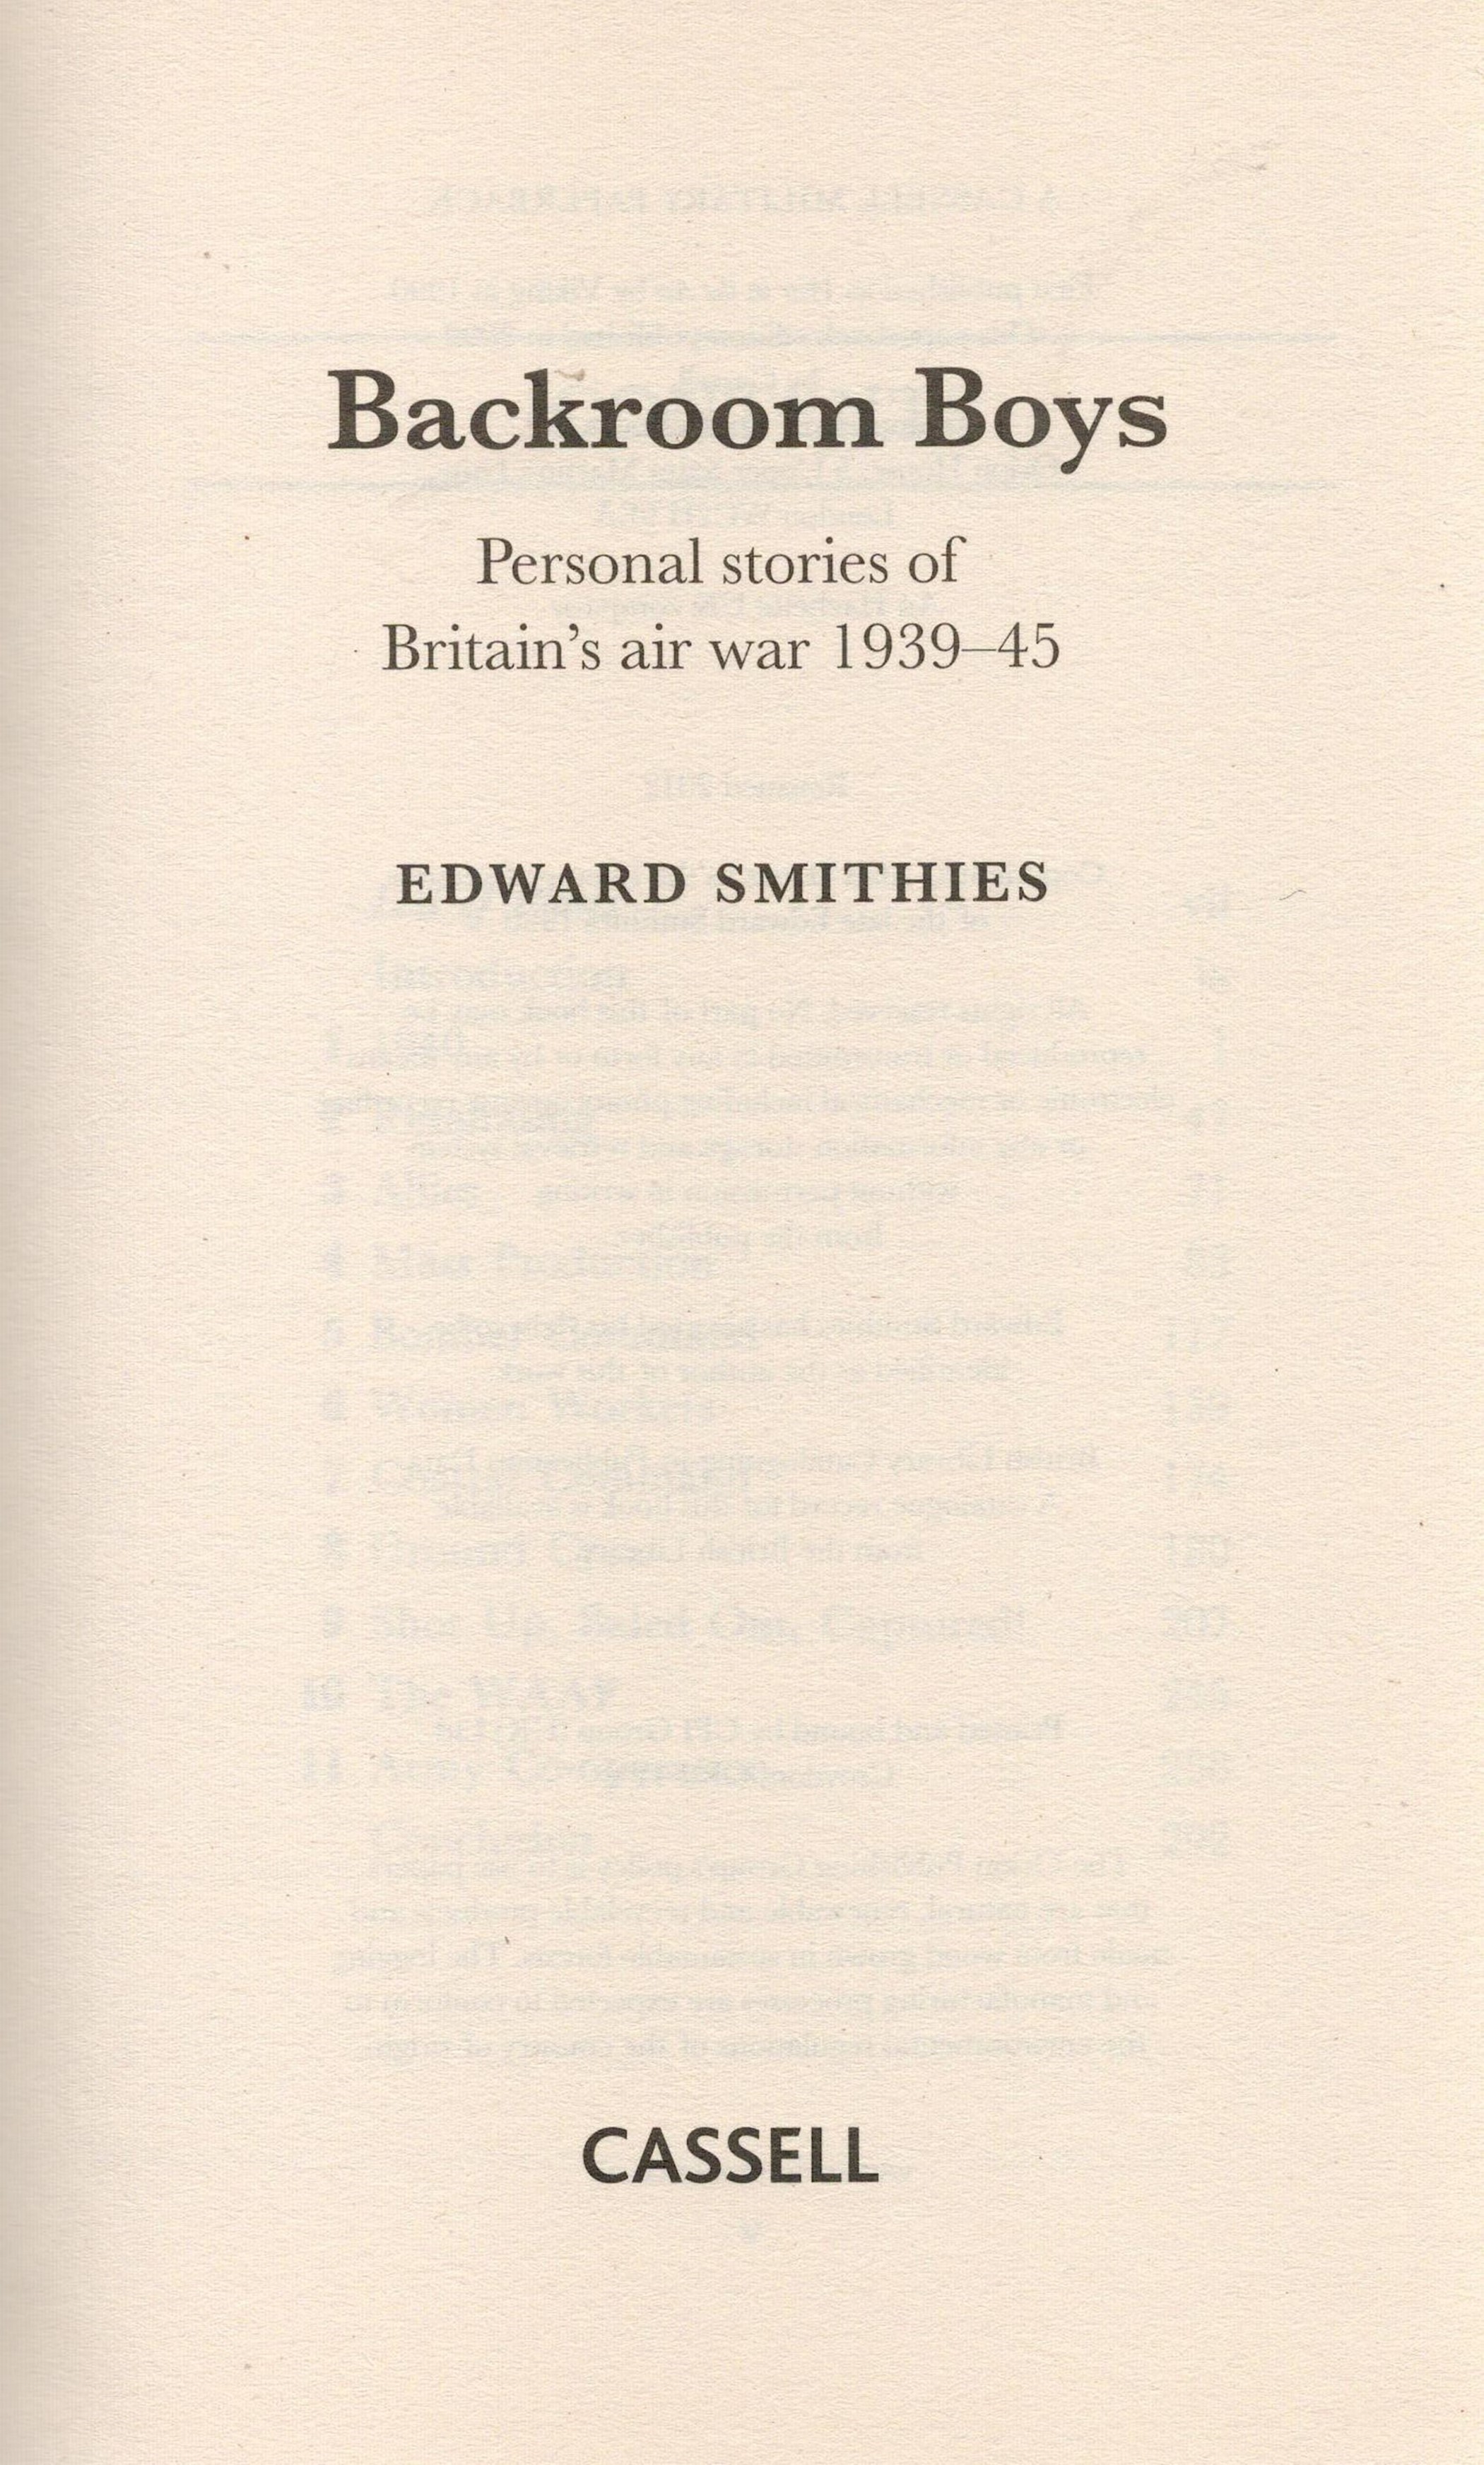 Backroom Boys Personal Stories of Britain's Air War by Edward Smithies Softback Book reissued 2012 - Image 5 of 9